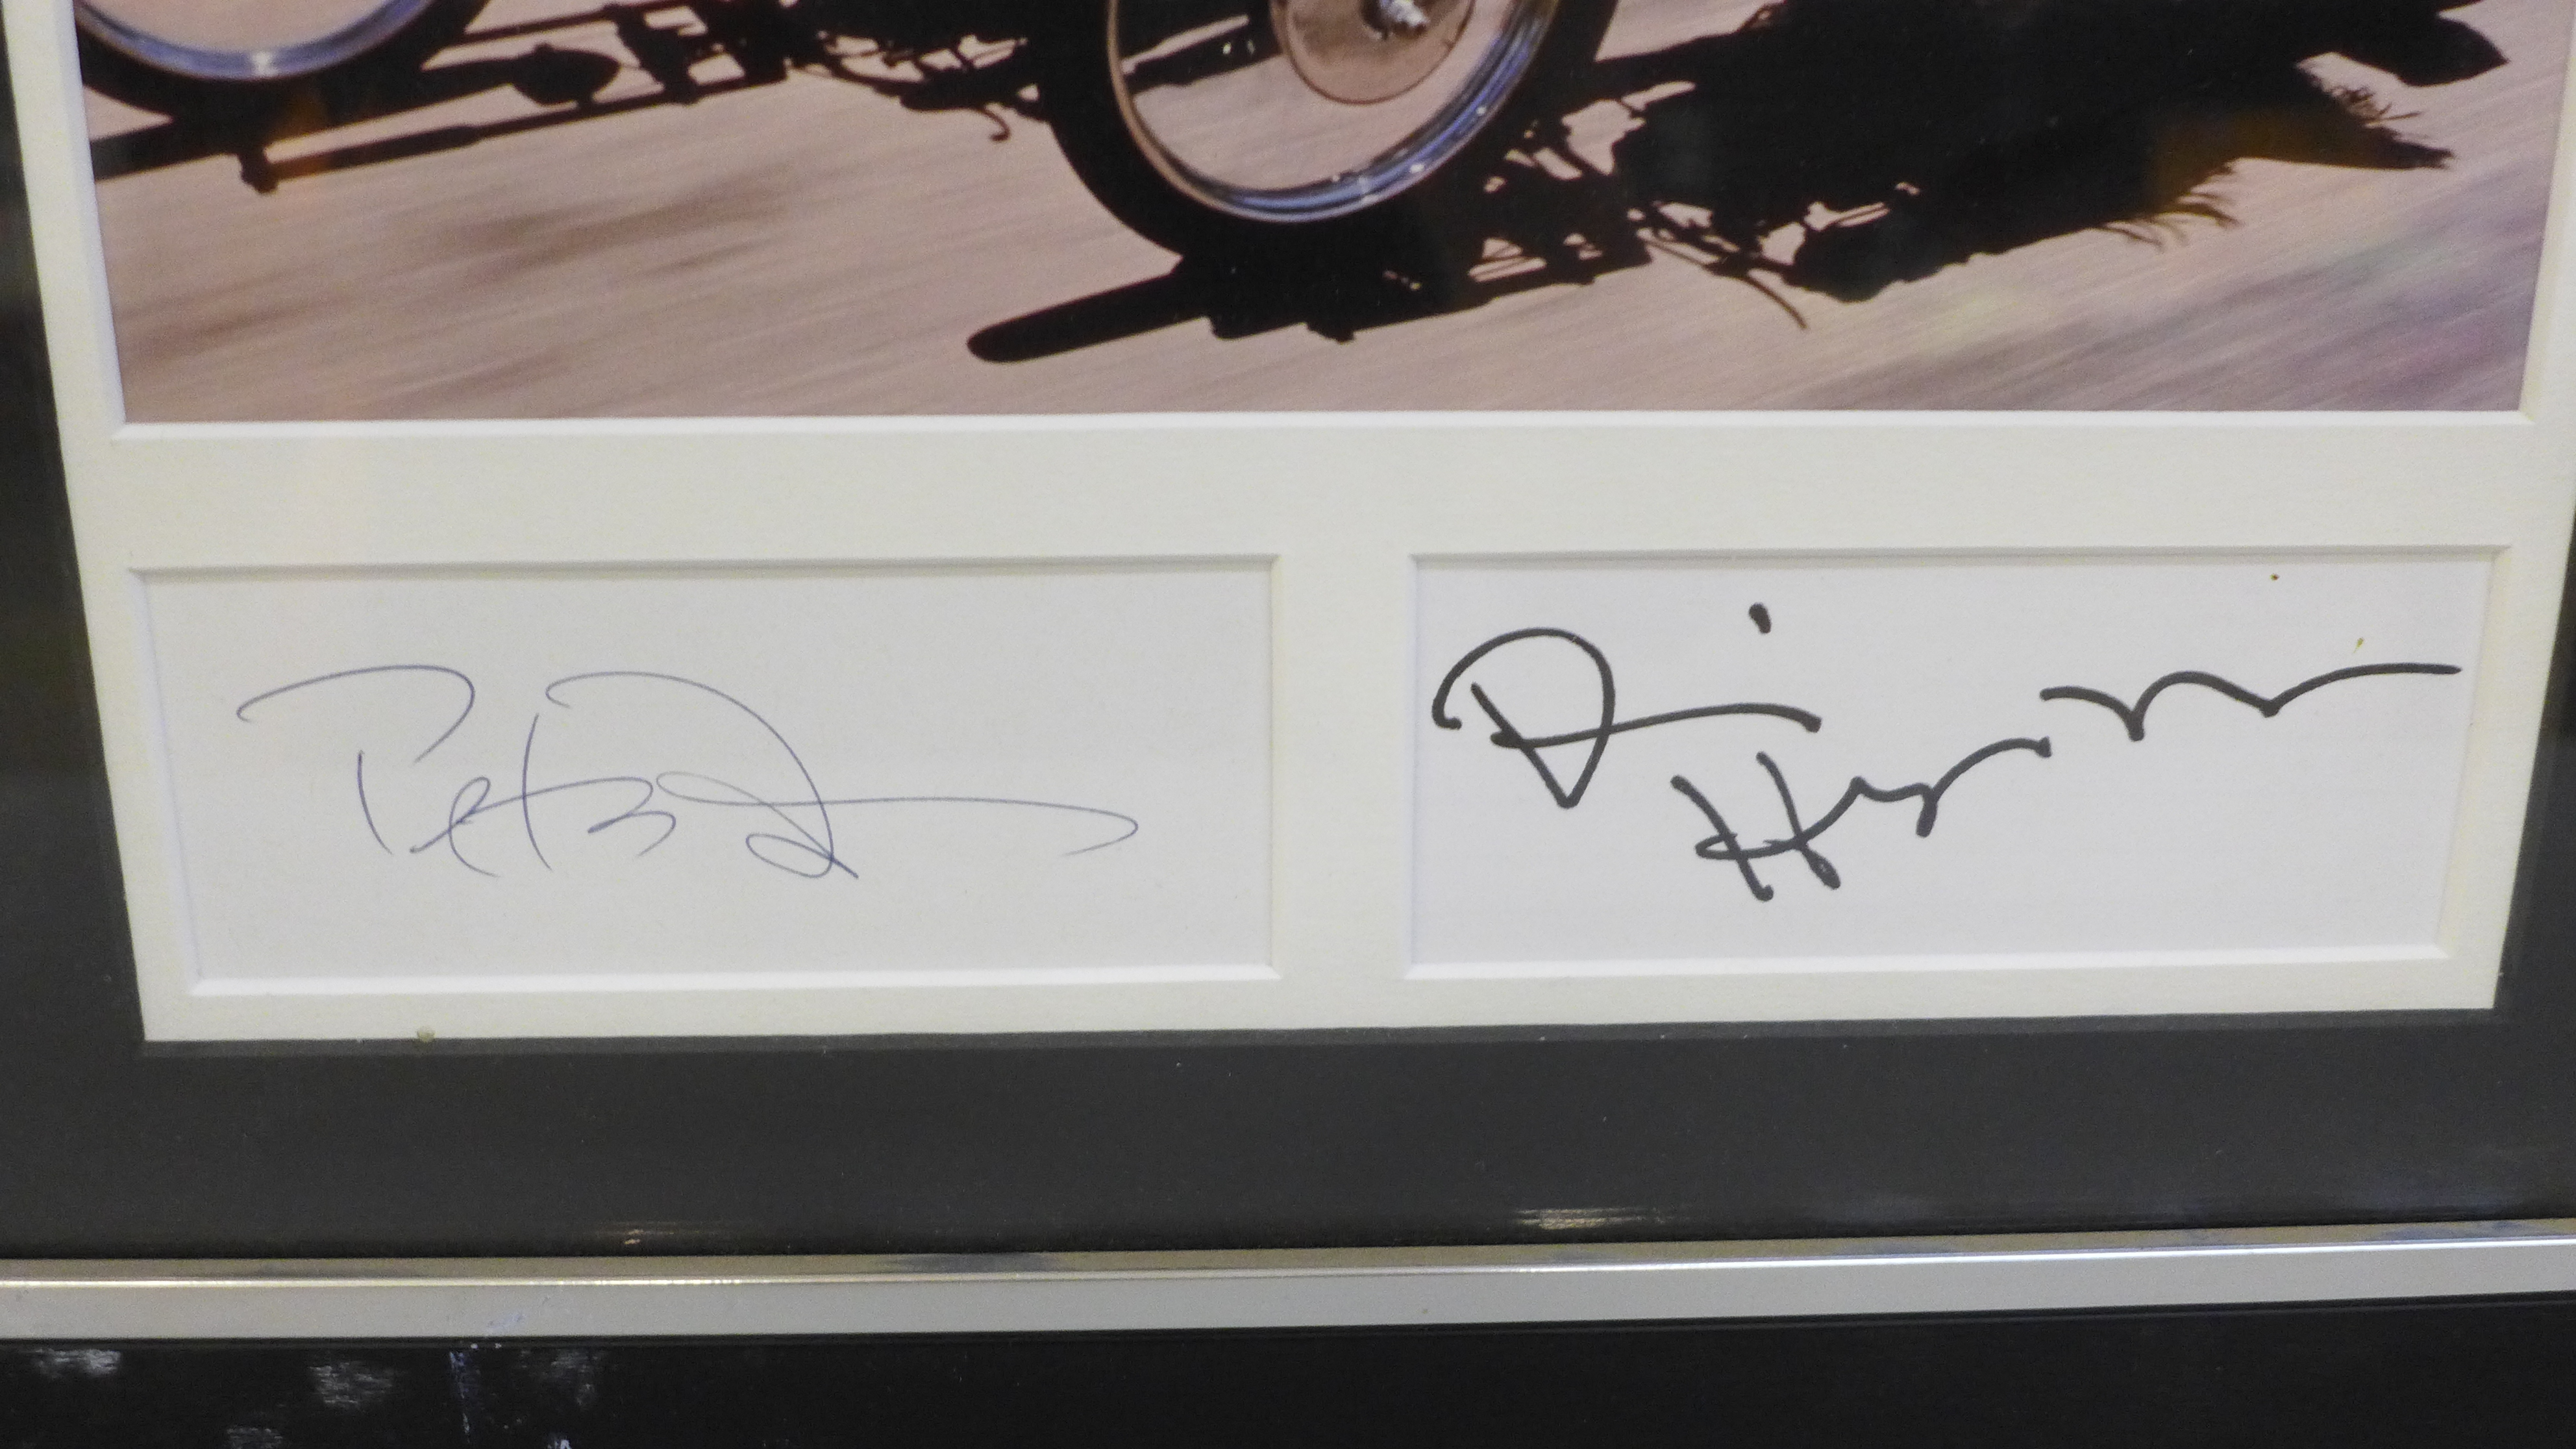 A Peter Fonda and Dennis Hopper, Easy Rider, autographs and photograph display with Rutland - Image 3 of 4